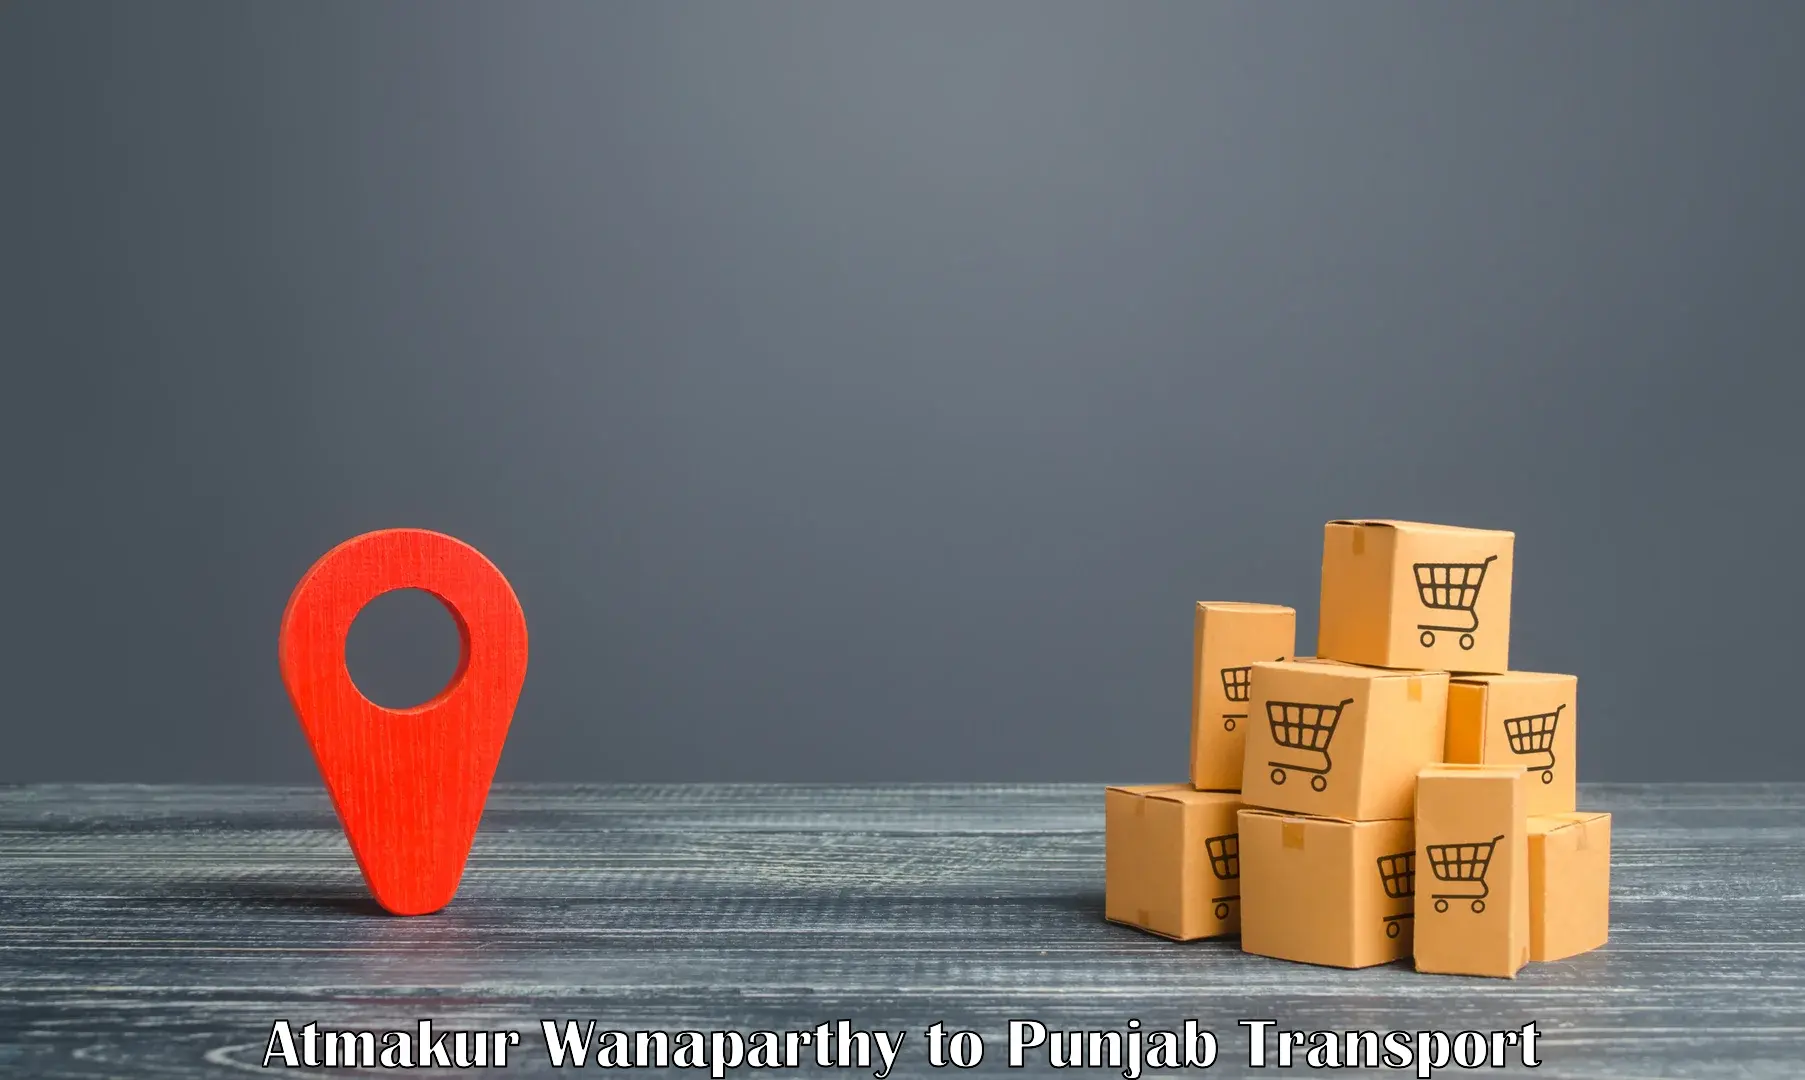 Furniture transport service Atmakur Wanaparthy to Pathankot